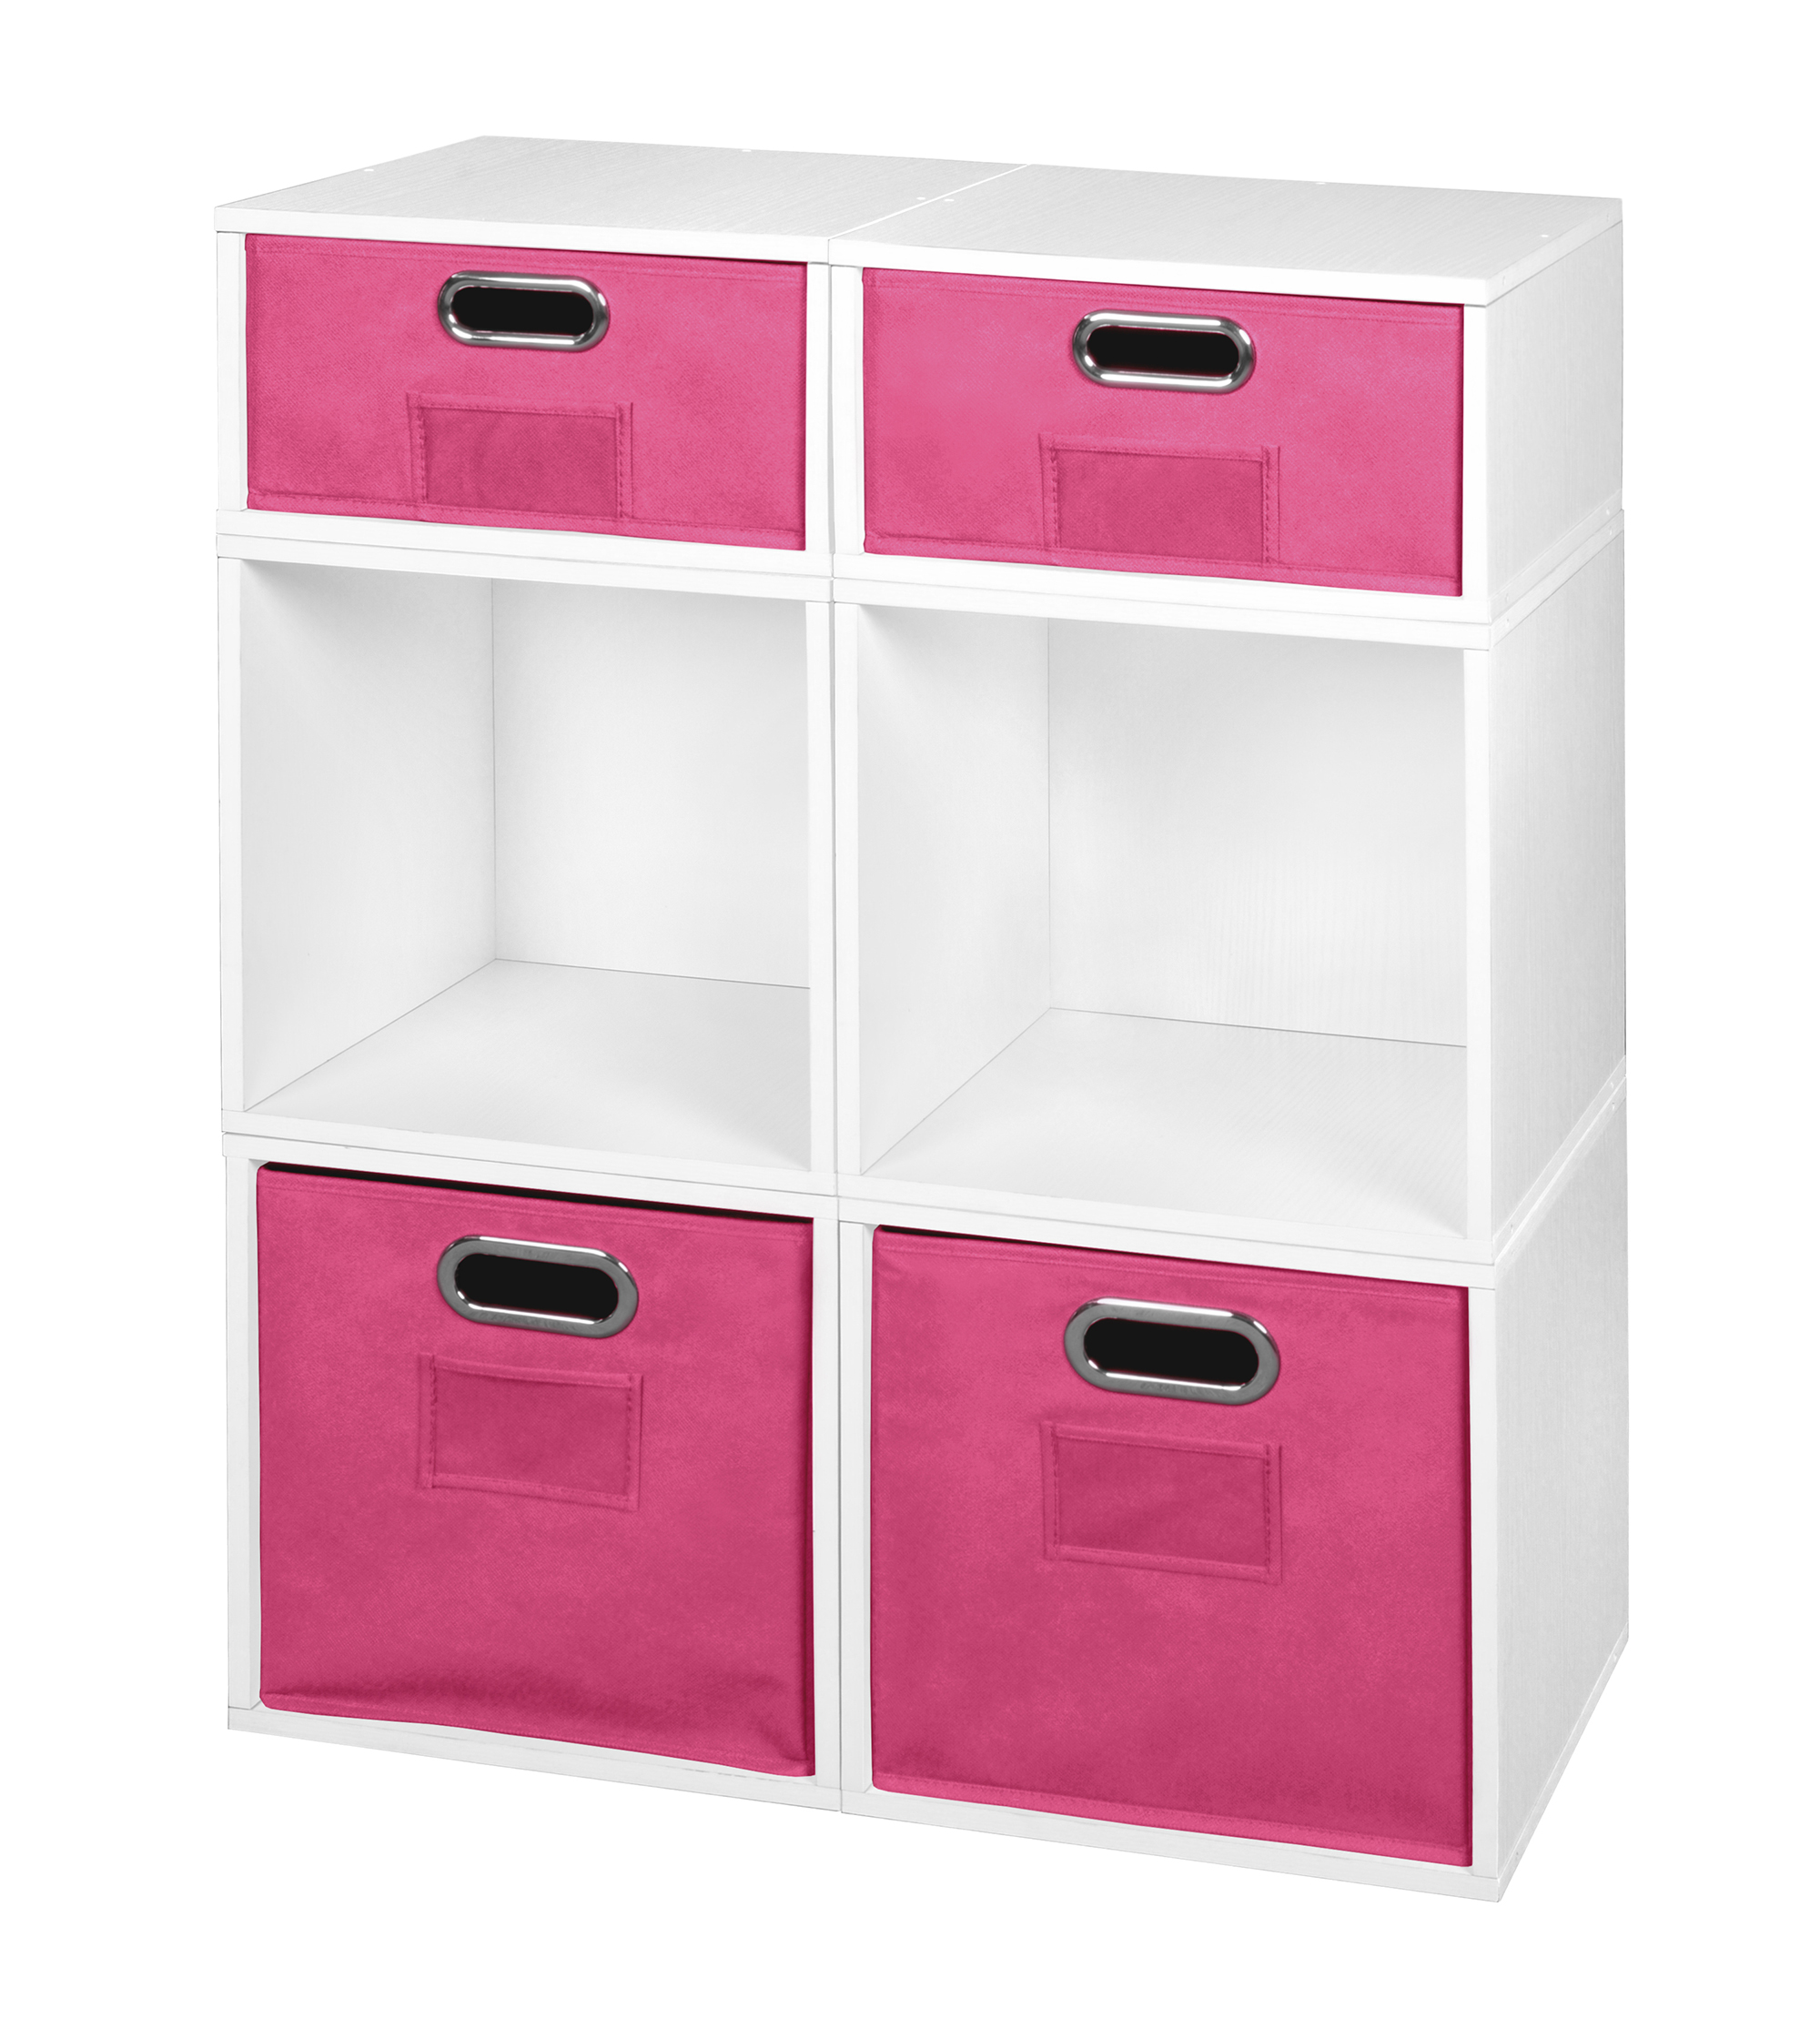 Niche Cubo Storage Set- 4 Full Cubes/2 Half Cubes with Foldable Storage Bins- White Wood Grain/Pink - image 1 of 10